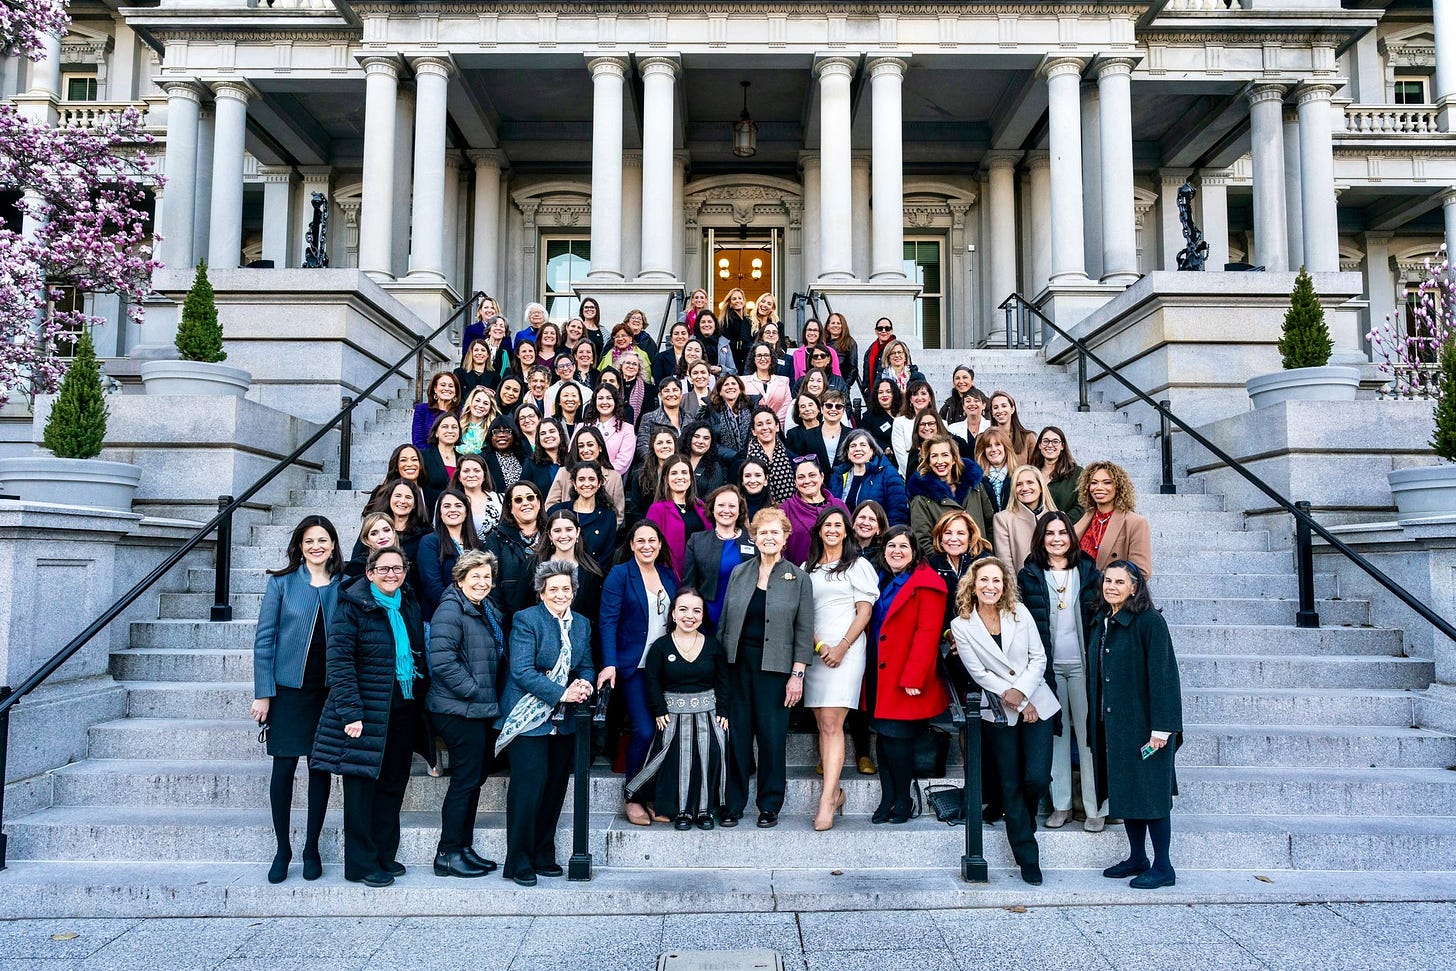 We all have a stake in this': White House holds first-ever Jewish Women's  Forum